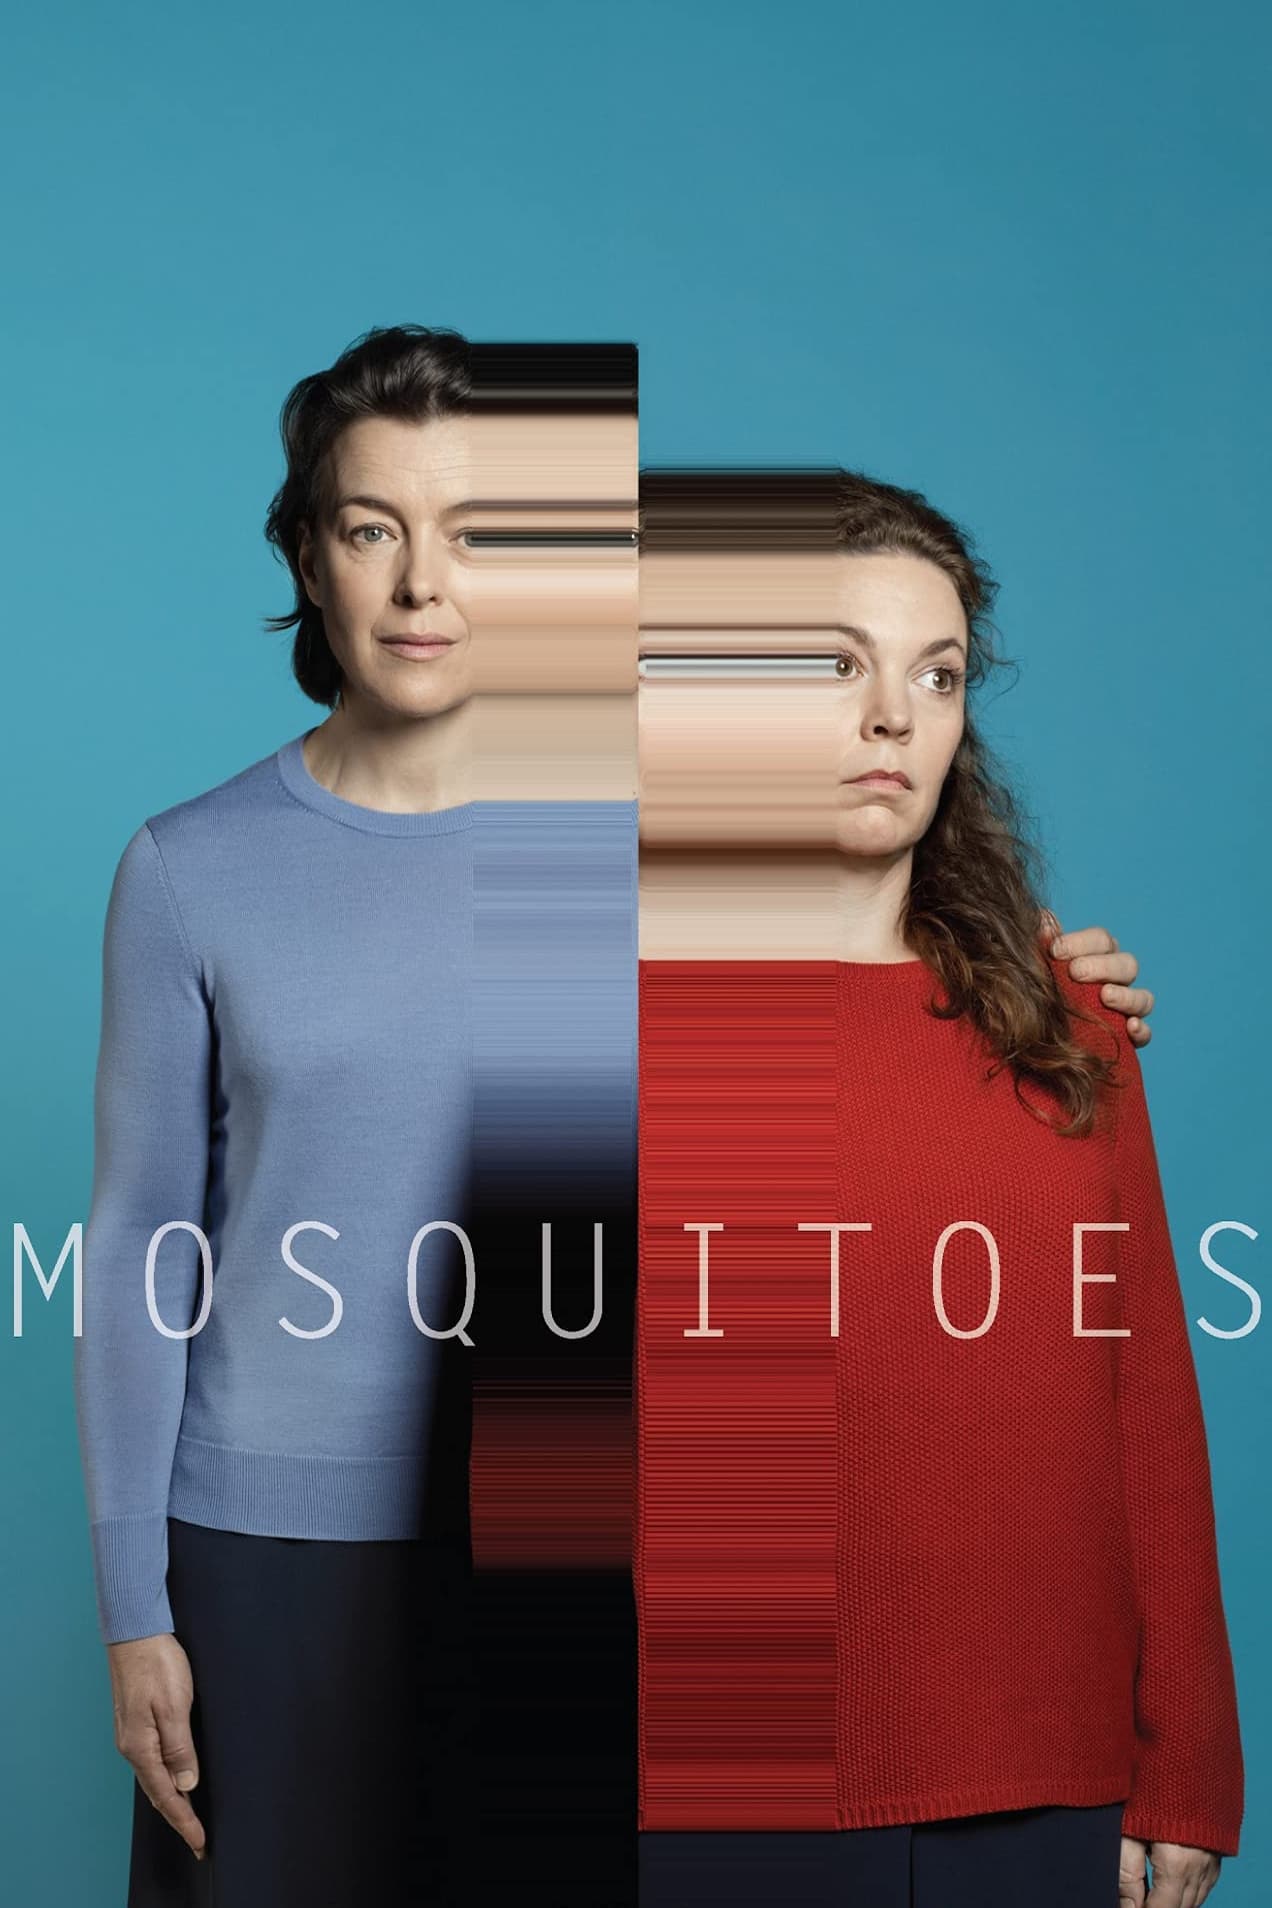 National Theatre Live: Mosquitoes